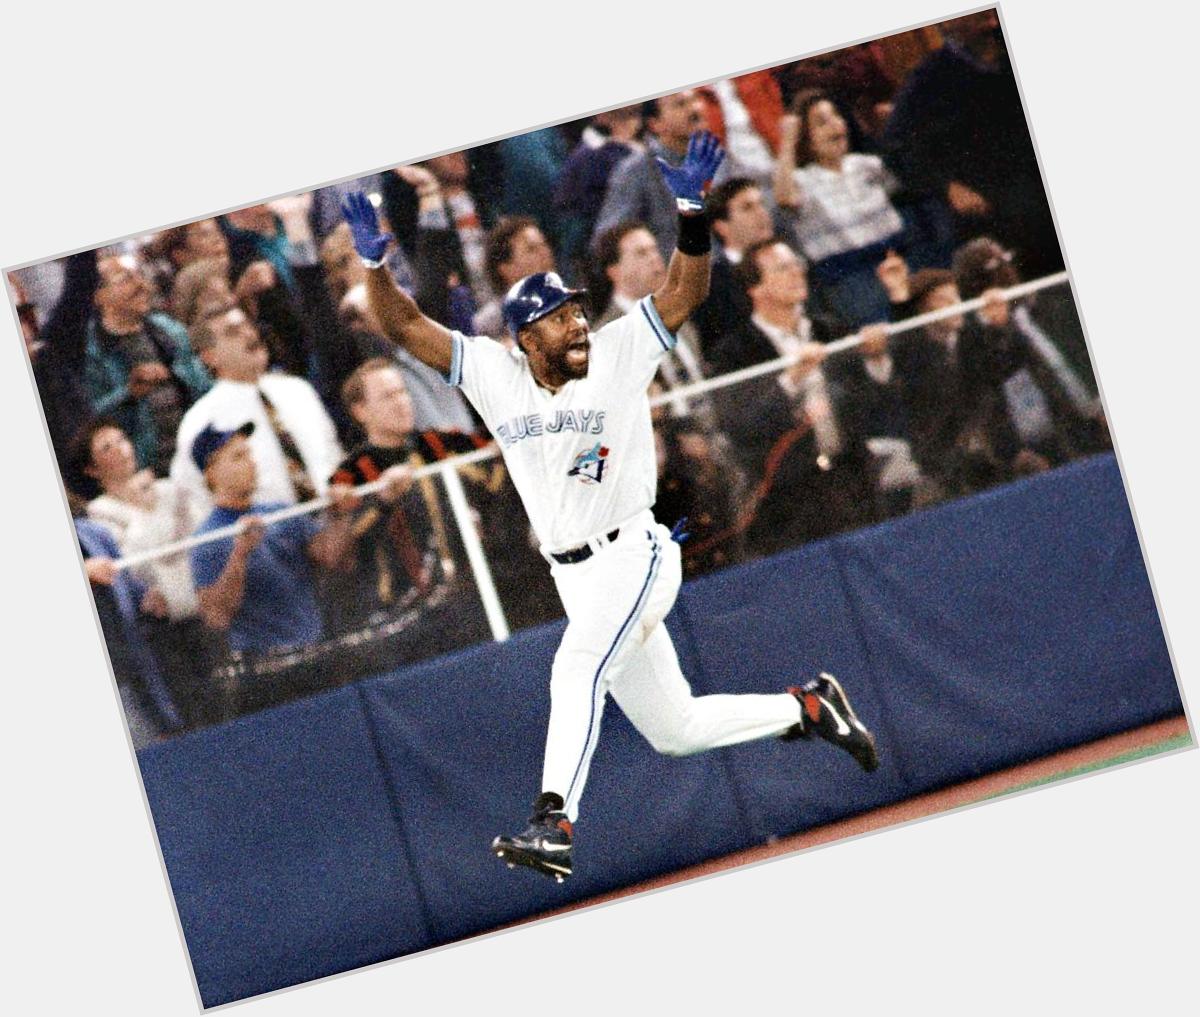 Happy birthday Jolting Joe Carter! Your homerun still gives me shivers. Today we honor you 